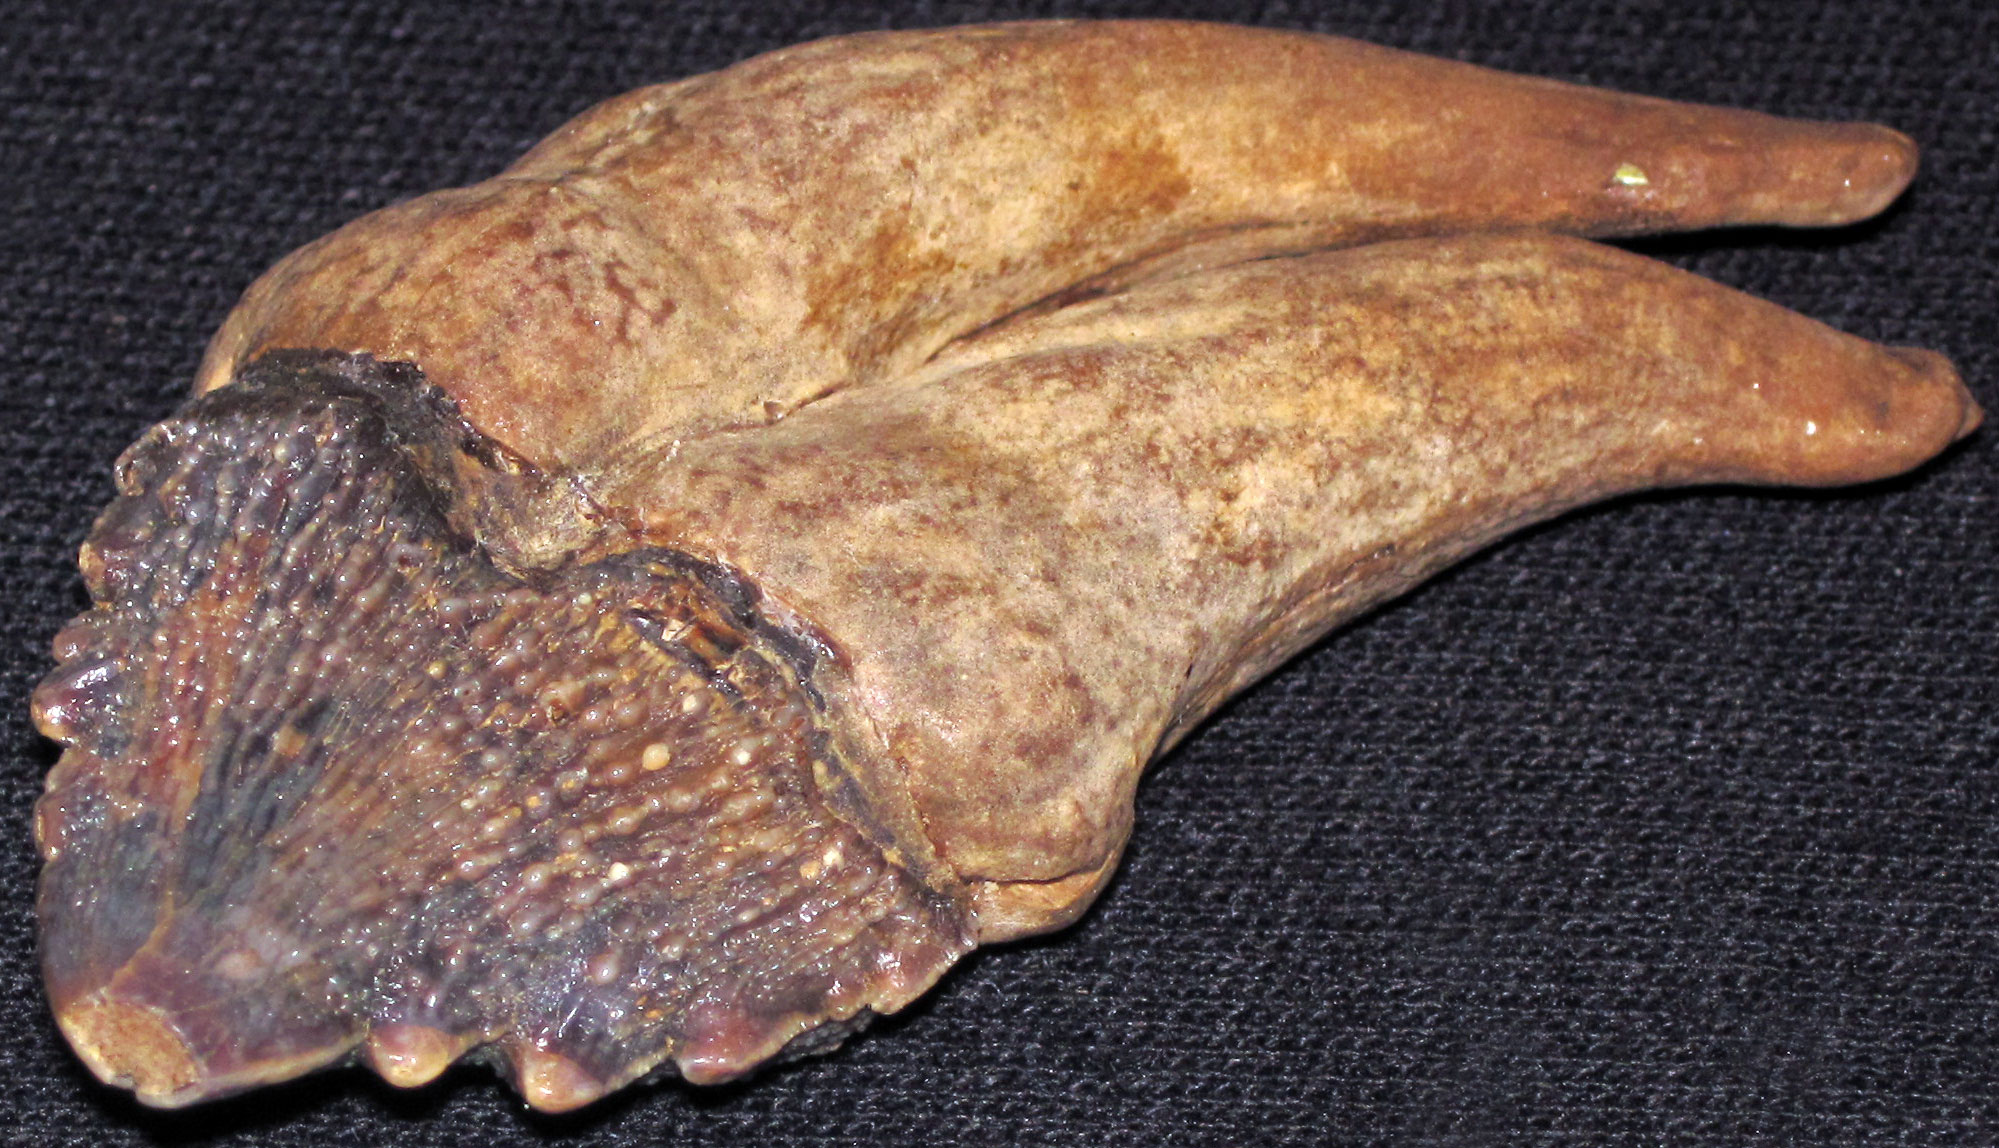 Photograph of the tooth of a shark-toothed porpoise from the Miocene of Maryland. The photo shows a triangular tooth with serrated edges and a root with two elongated lobes.